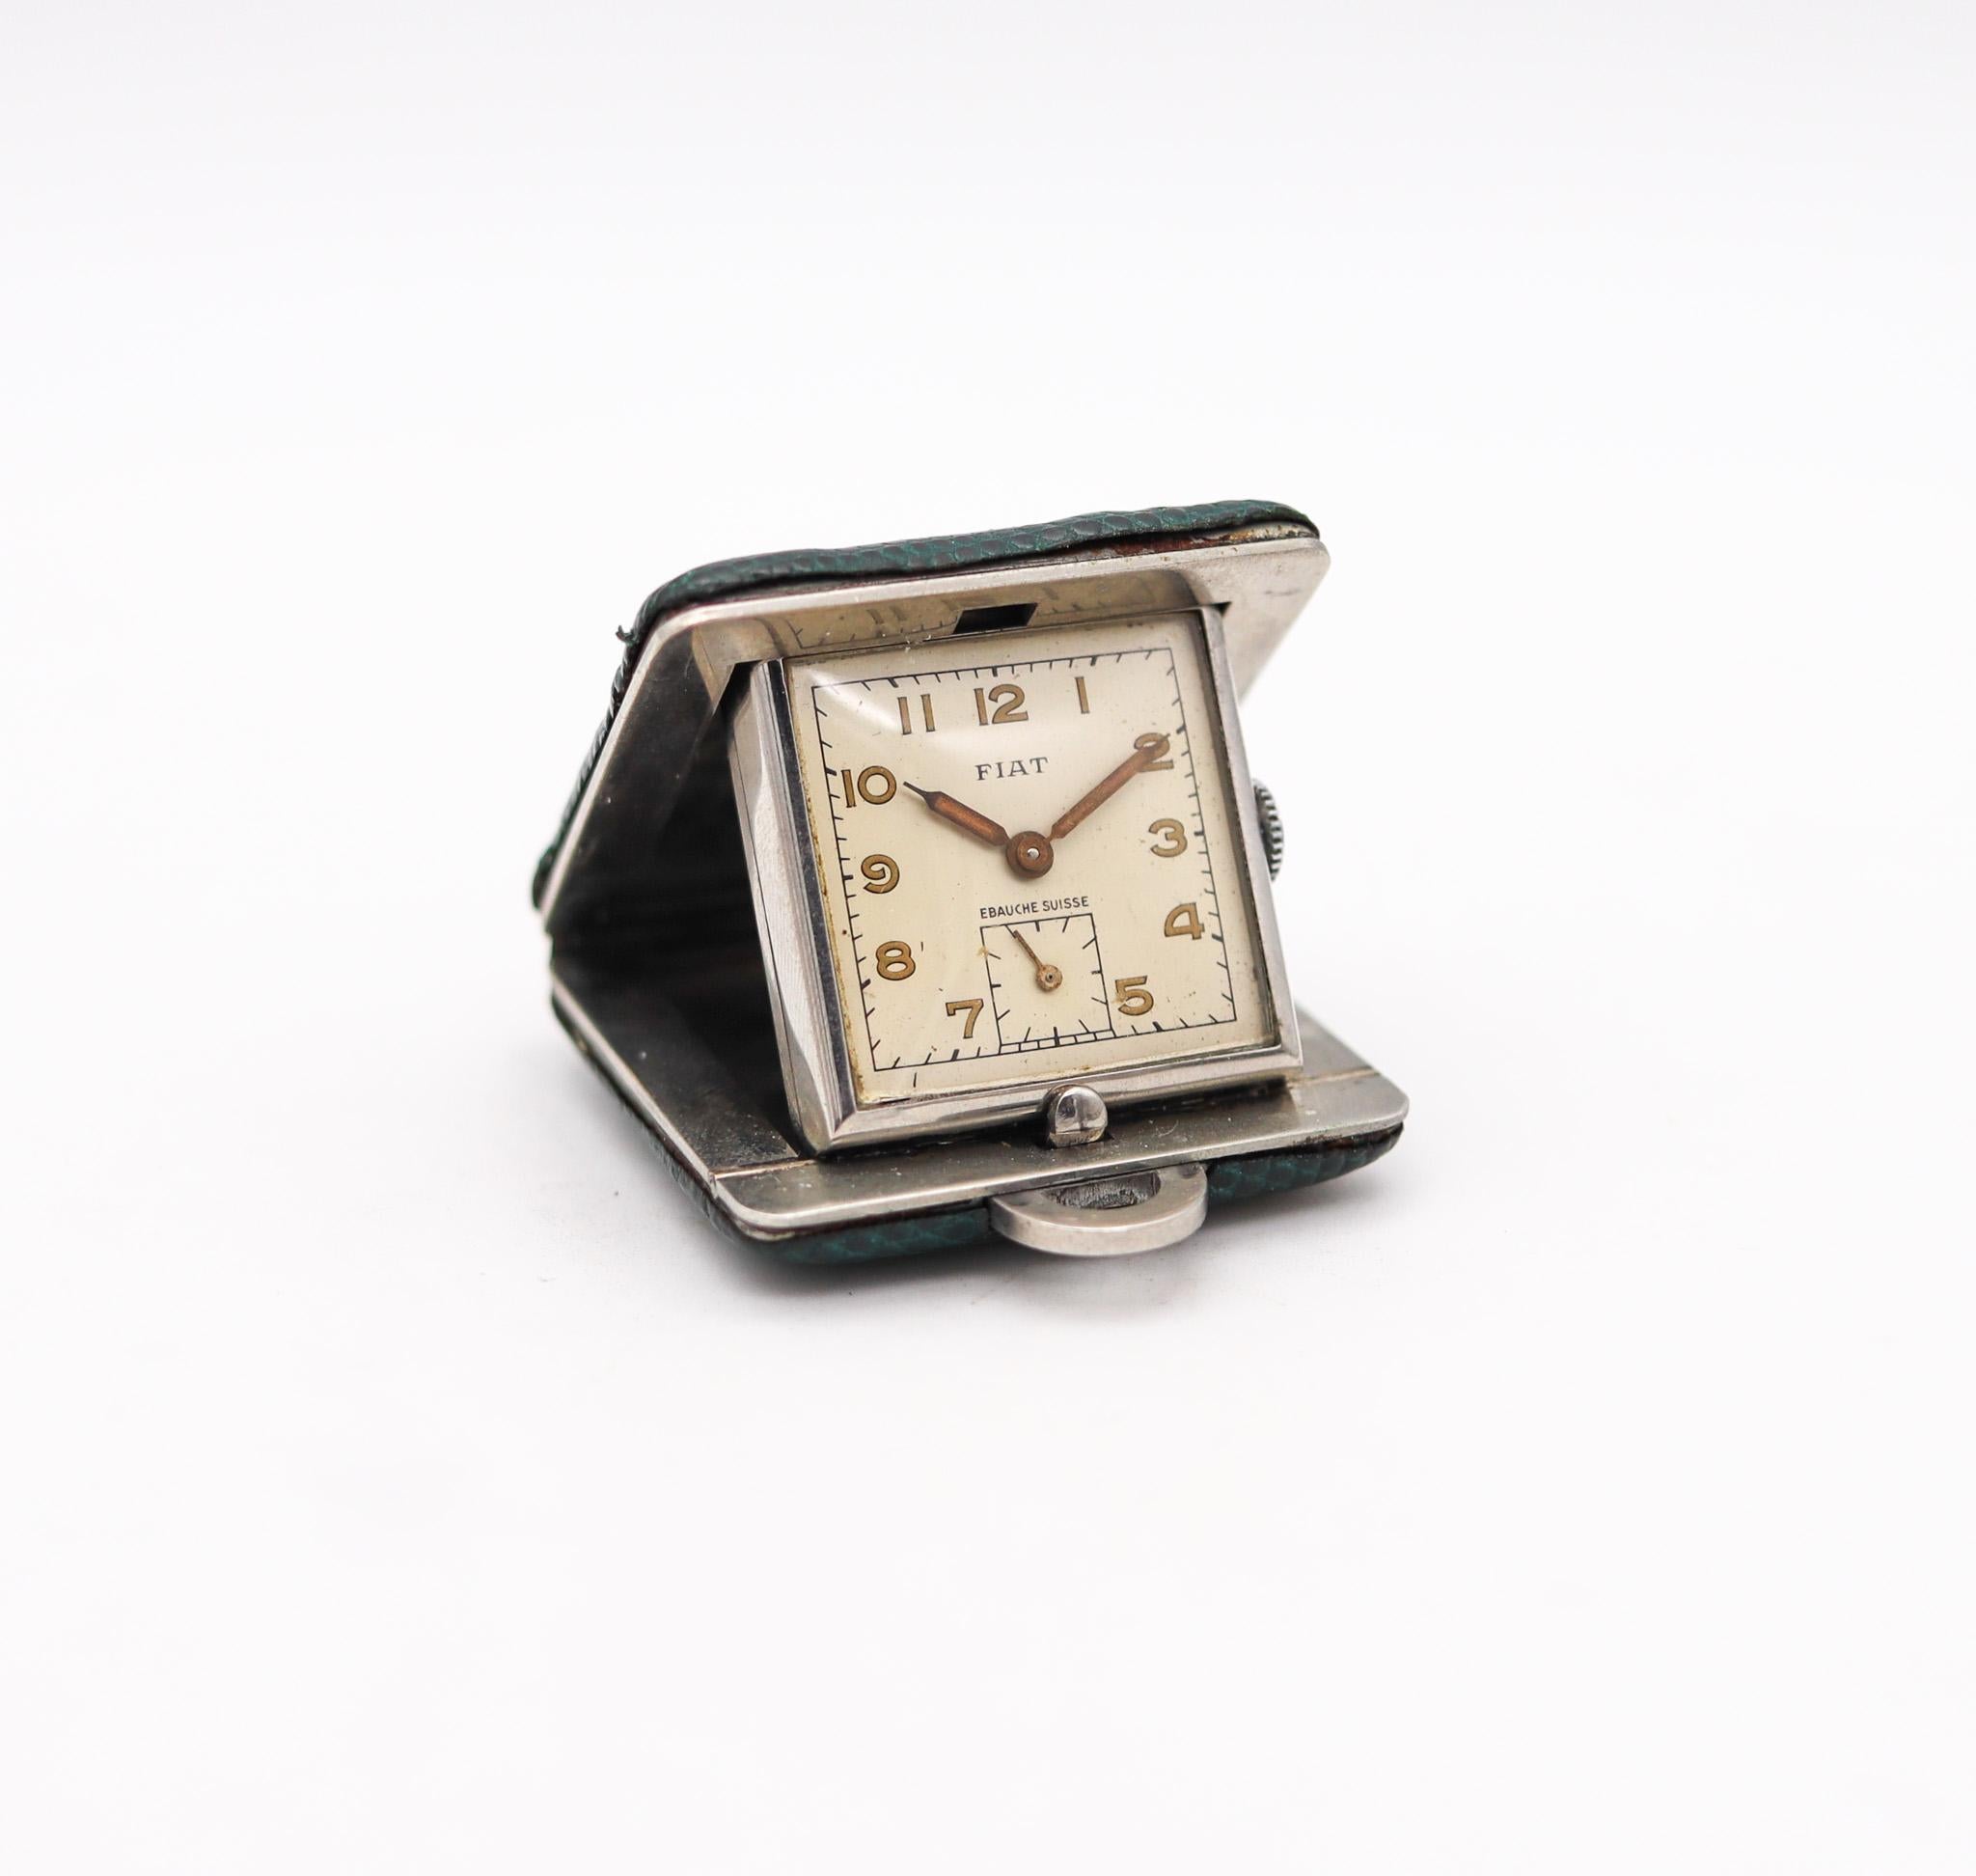 Travel and pendant clock designed by the Fiat Watch Company.

Beautiful foldable travel clock, manufactured in Switzerland by the Fiat Watch Company during the post war period, back in the 1950. This clock can be fully displayed in a table or wear